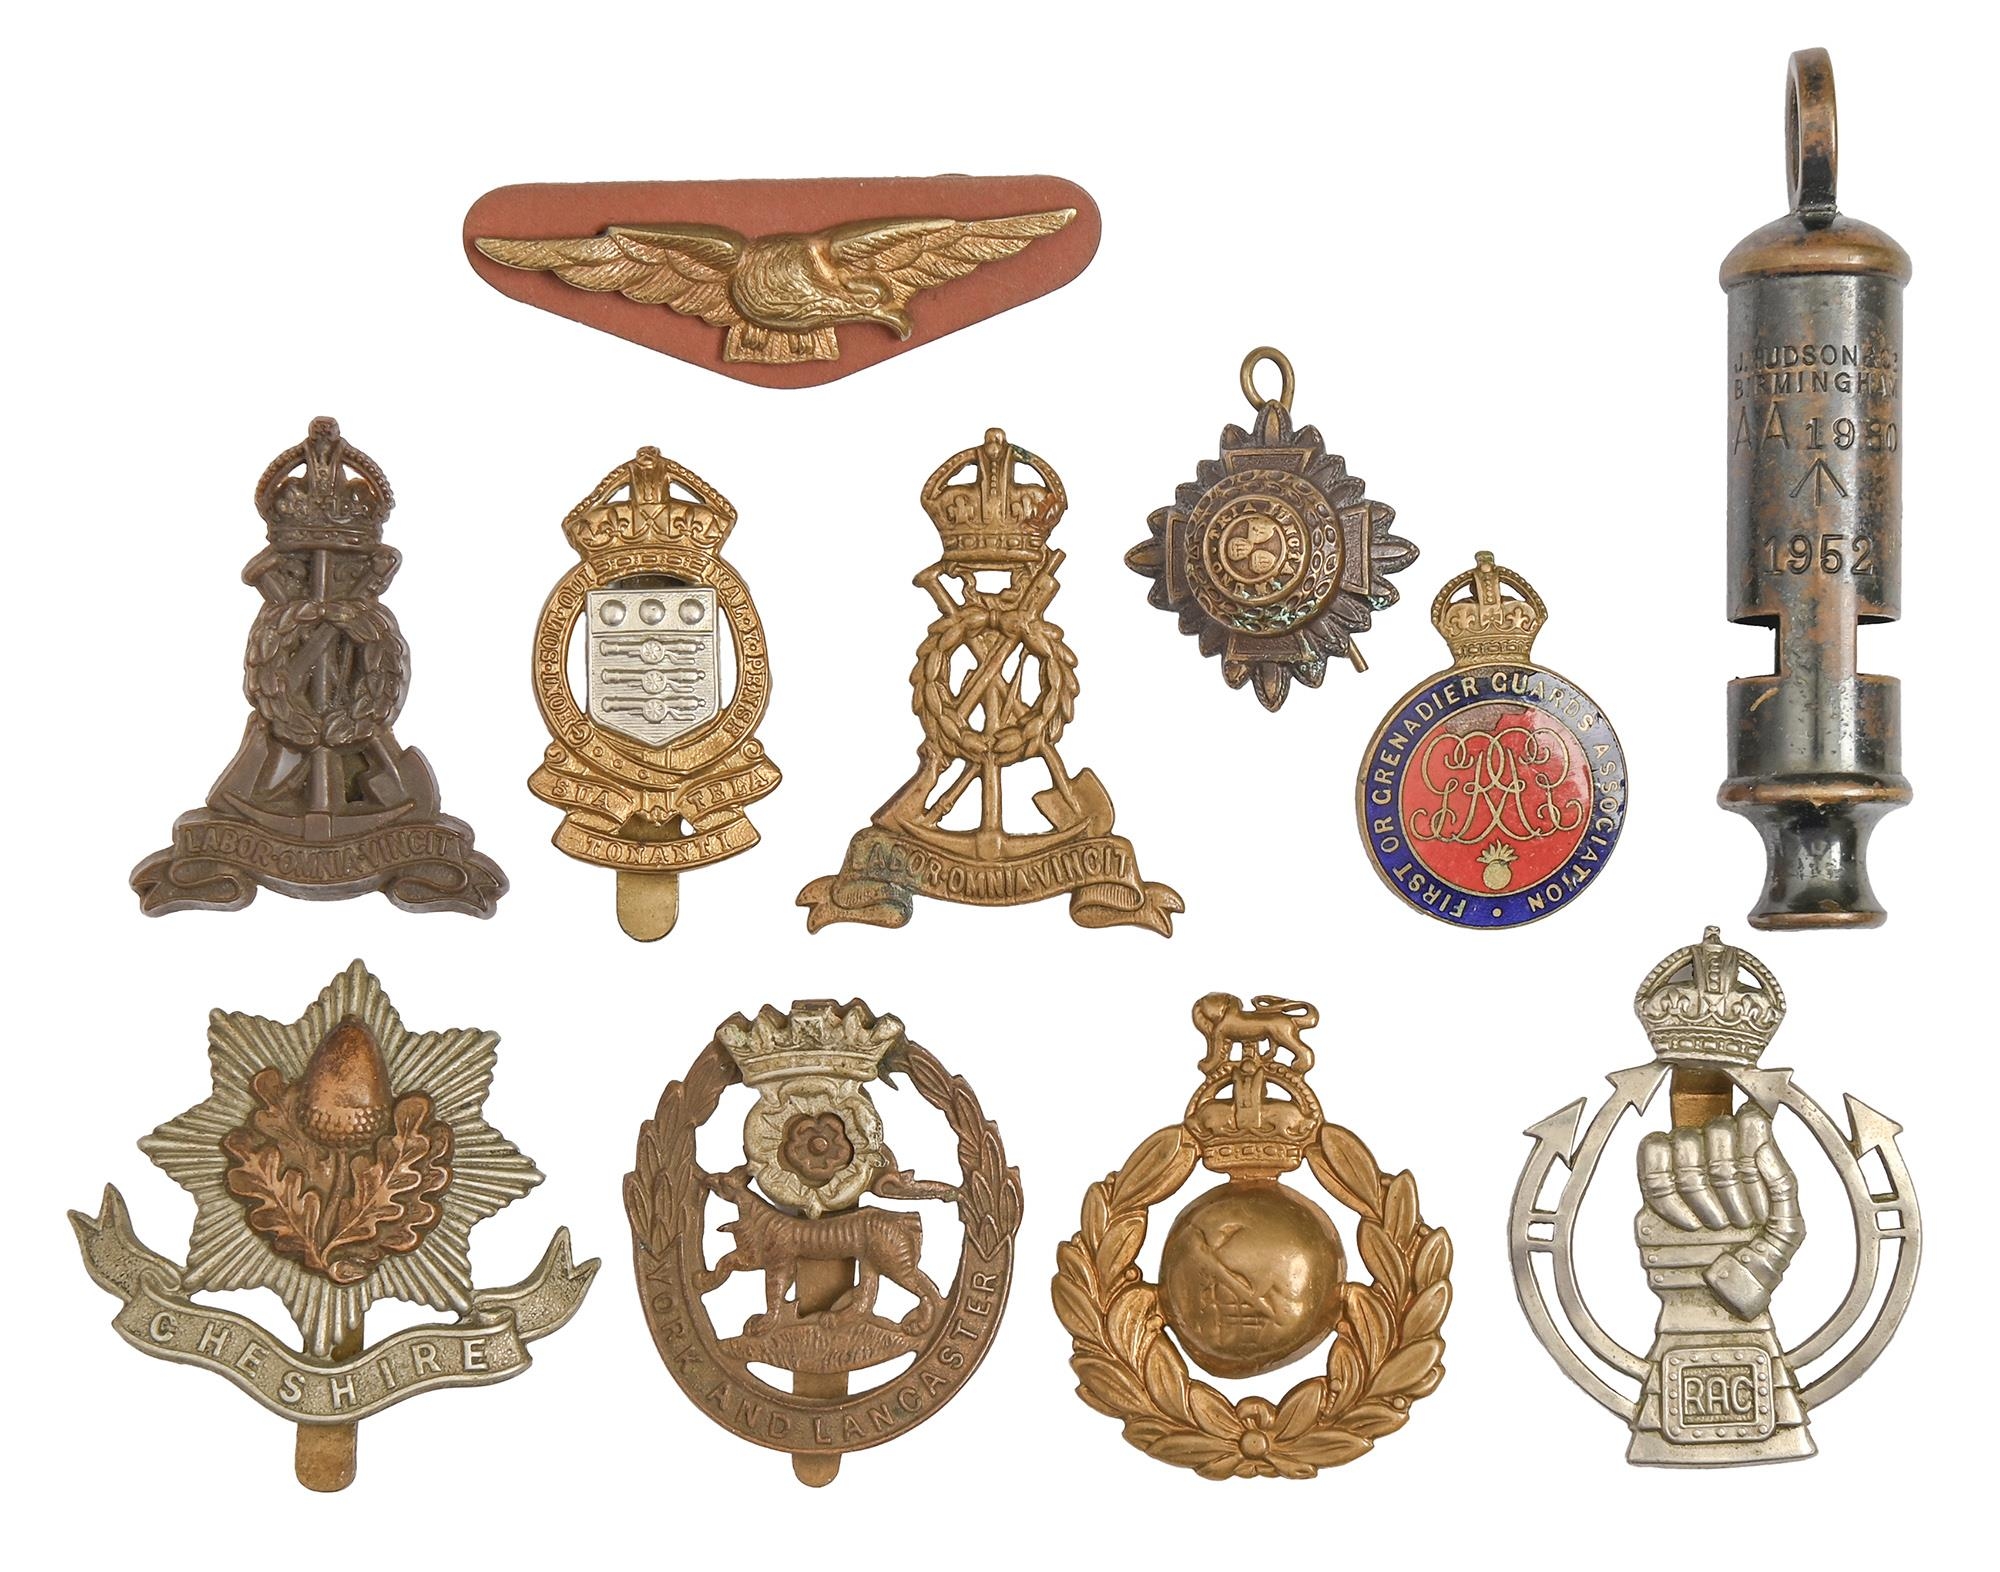 Militaria. Eight British Army cap badges, including York and Lancashire and Cheshire Regiment, two